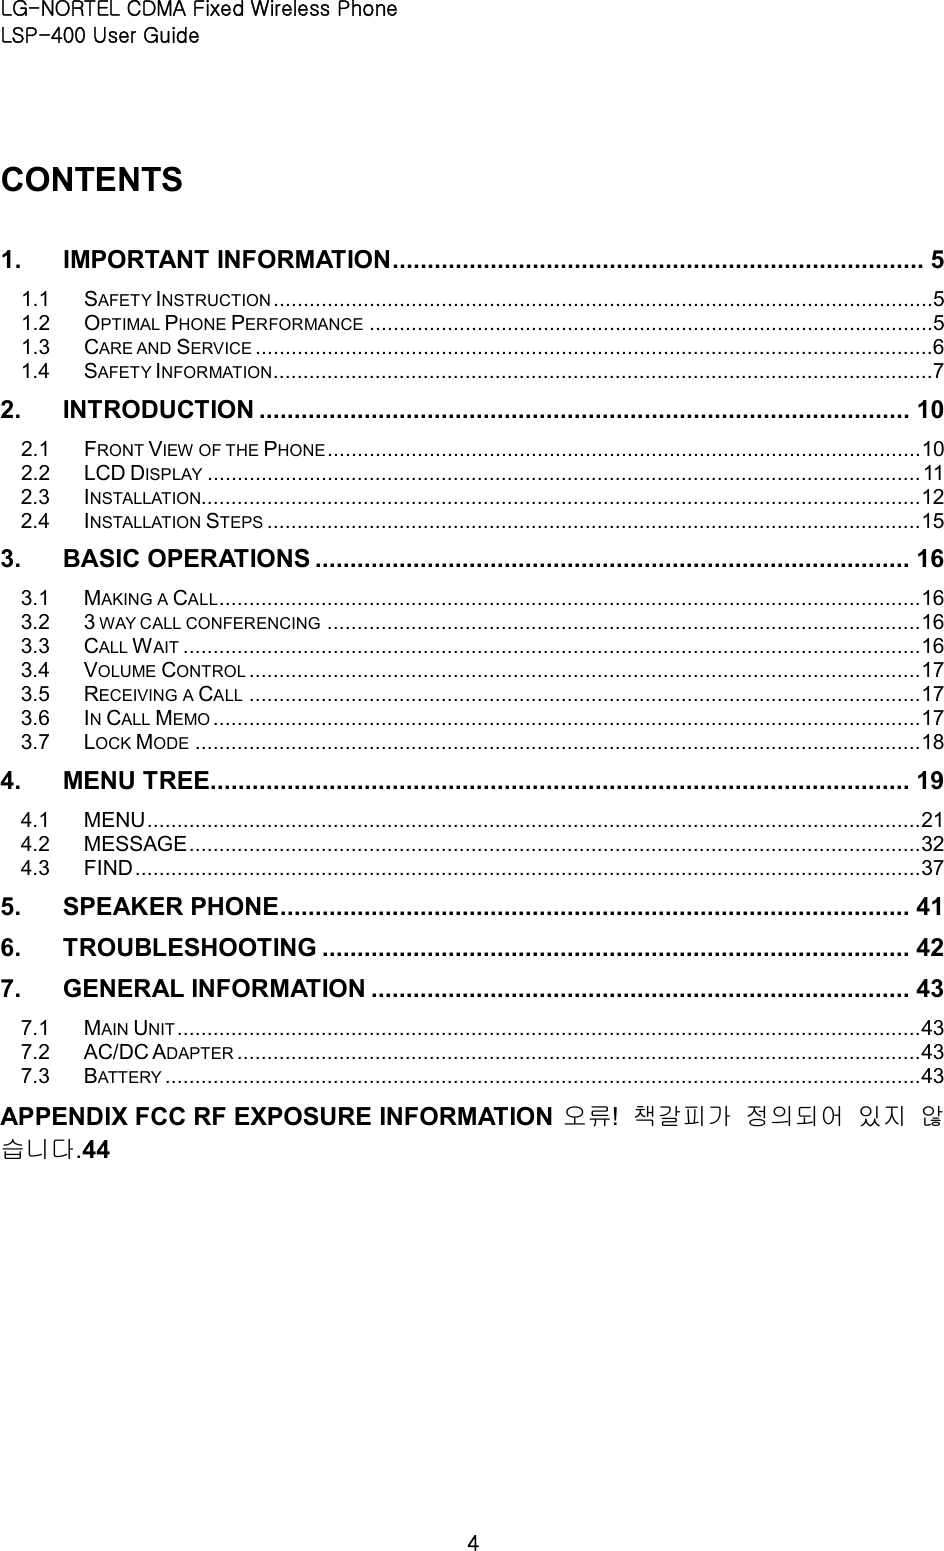 LG-NORTEL CDMA Fixed Wireless Phone   LSP-400 User Guide 4 CONTENTS   1. IMPORTANT INFORMATION ............................................................................ 5 1.1 SAFETY INSTRUCTION ..............................................................................................................5 1.2 OPTIMAL PHONE PERFORMANCE ..............................................................................................5 1.3 CARE AND SERVICE .................................................................................................................6 1.4 SAFETY INFORMATION ..............................................................................................................7 2. INTRODUCTION ............................................................................................. 10 2.1 FRONT VIEW OF THE PHONE ................................................................................................... 10 2.2 LCD DISPLAY ....................................................................................................................... 11 2.3 INSTALLATION........................................................................................................................ 12 2.4 INSTALLATION STEPS ............................................................................................................. 15 3. BASIC OPERATIONS ..................................................................................... 16 3.1 MAKING A CALL ..................................................................................................................... 16 3.2 3 WAY CALL CONFERENCING ................................................................................................... 16 3.3 CALL WAIT ........................................................................................................................... 16 3.4 VOLUME CONTROL ................................................................................................................ 17 3.5 RECEIVING A CALL ................................................................................................................ 17 3.6 IN CALL MEMO ...................................................................................................................... 17 3.7 LOCK MODE ......................................................................................................................... 18 4. MENU TREE.................................................................................................... 19 4.1 MENU ................................................................................................................................. 21 4.2 MESSAGE .......................................................................................................................... 32 4.3 FIND ................................................................................................................................... 37 5. SPEAKER PHONE .......................................................................................... 41 6. TROUBLESHOOTING .................................................................................... 42 7. GENERAL INFORMATION ............................................................................. 43 7.1 MAIN UNIT ............................................................................................................................ 43 7.2 AC/DC ADAPTER .................................................................................................................. 43 7.3 BATTERY .............................................................................................................................. 43 APPENDIX FCC RF EXPOSURE INFORMATION 오류!  책갈피가 정의되어 있지 않습니다.44 